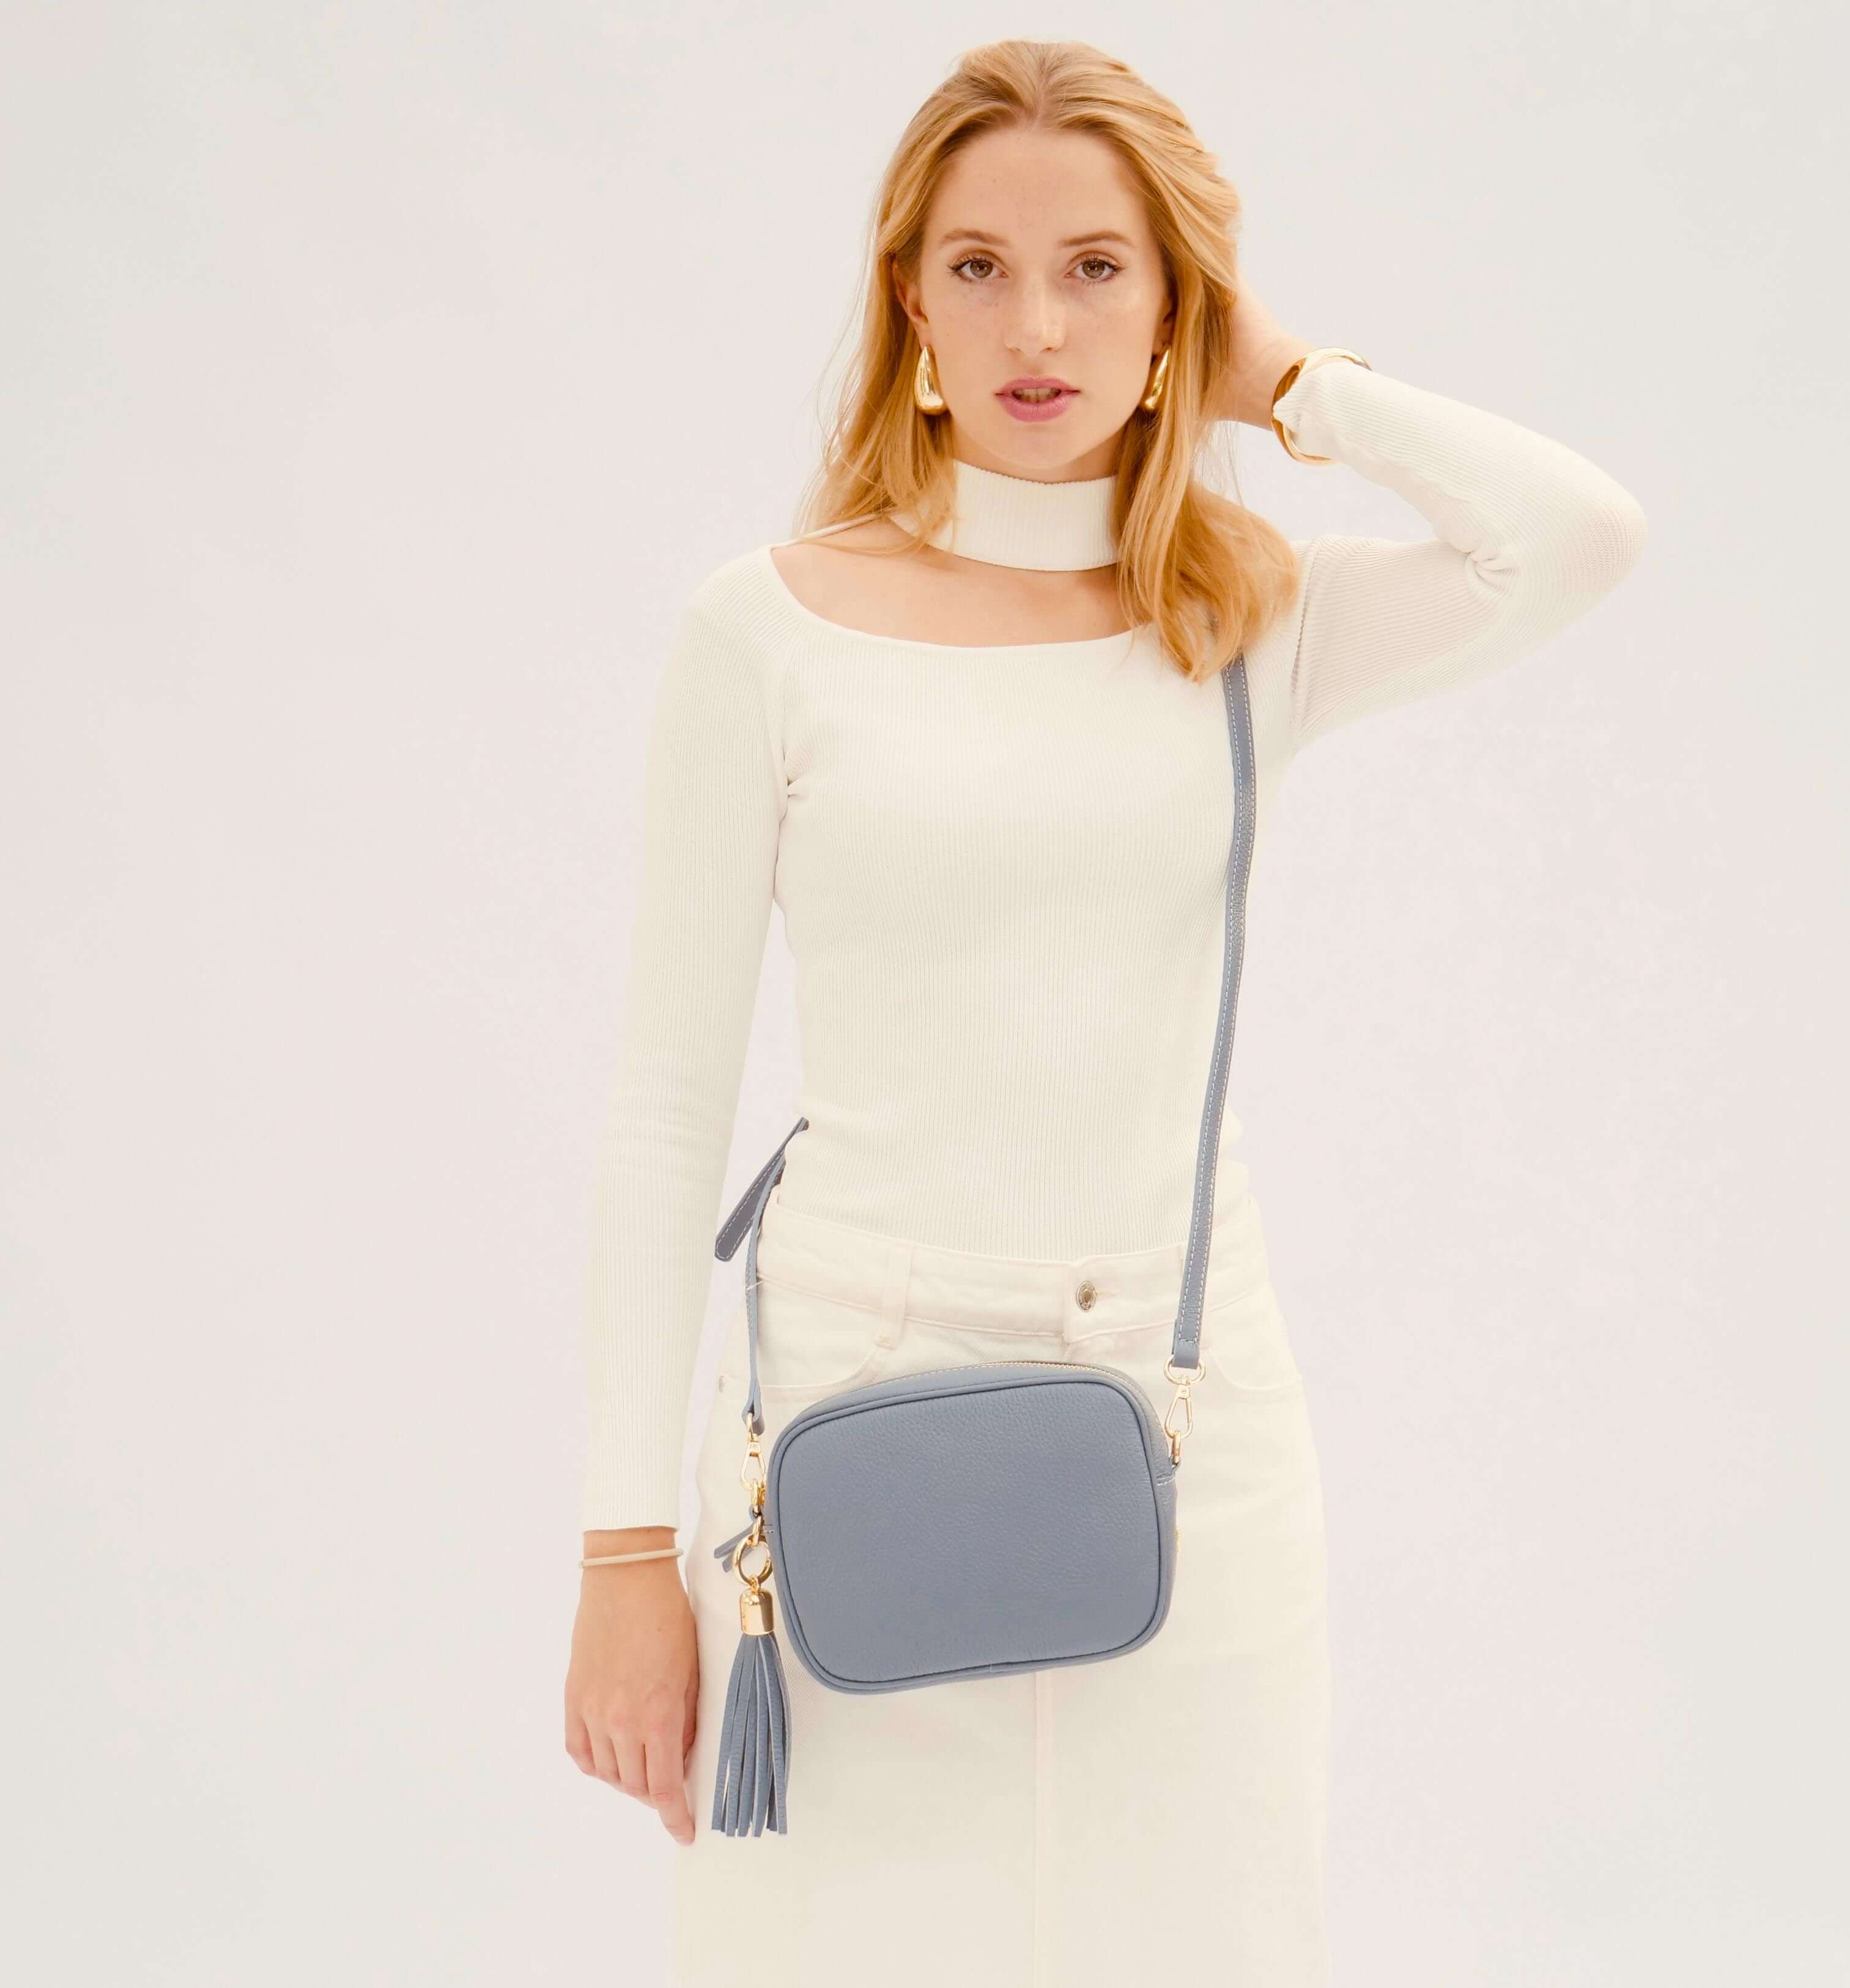 Denim Blue Leather Crossbody Bag With Gold Chain Strap – Apatchy London